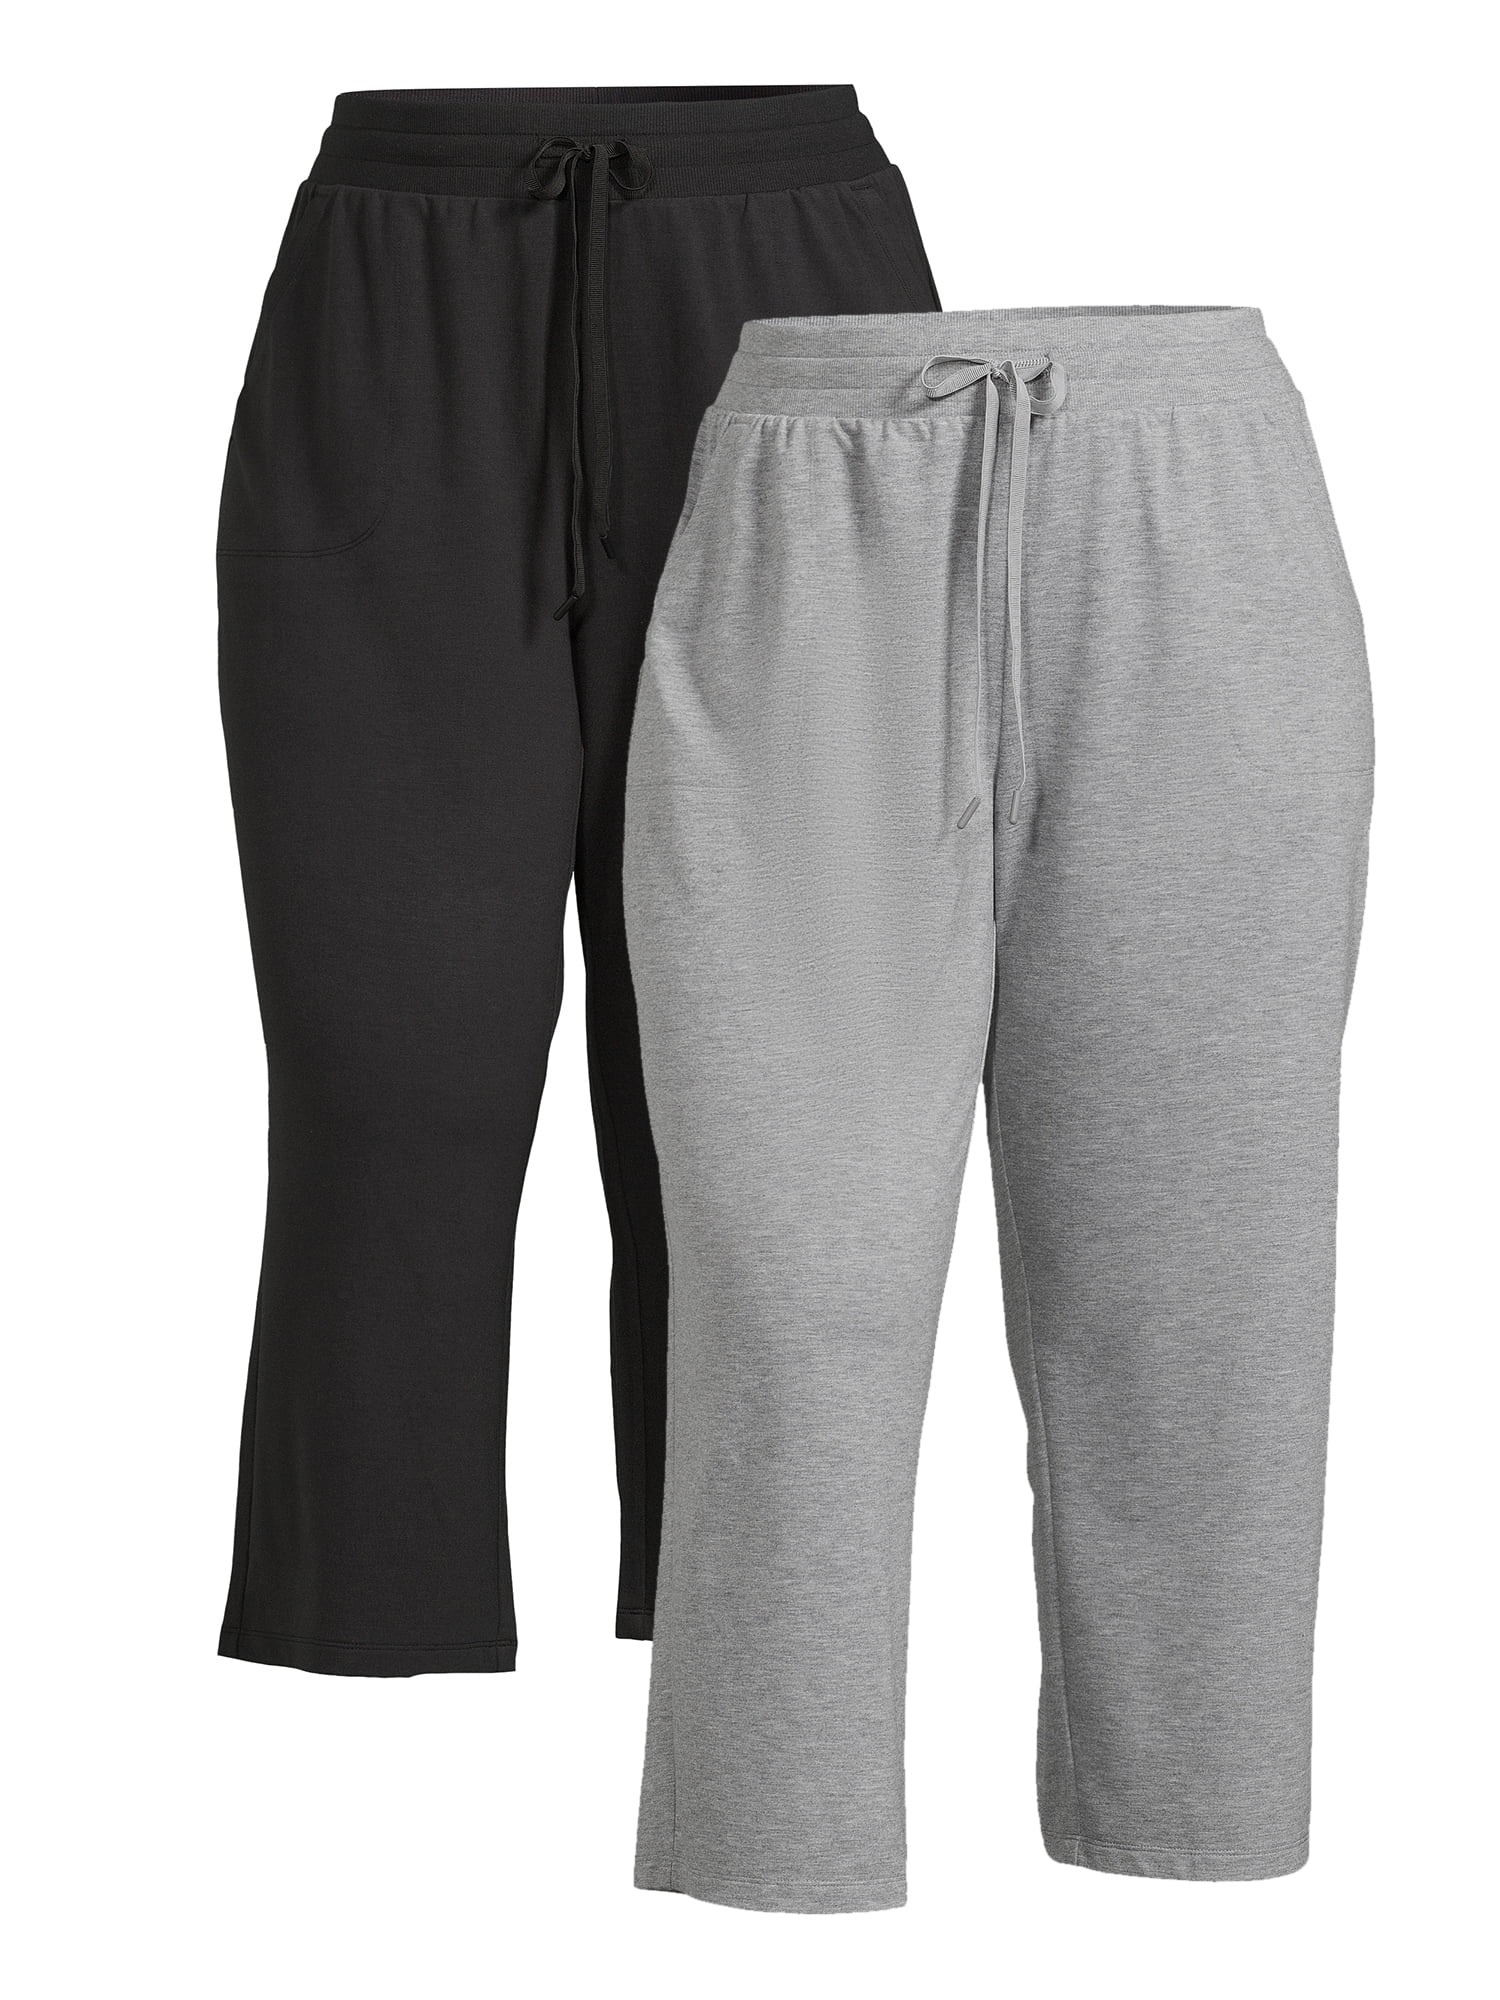 Athletic Works Women's Wide Leg Pants Available in Regular and